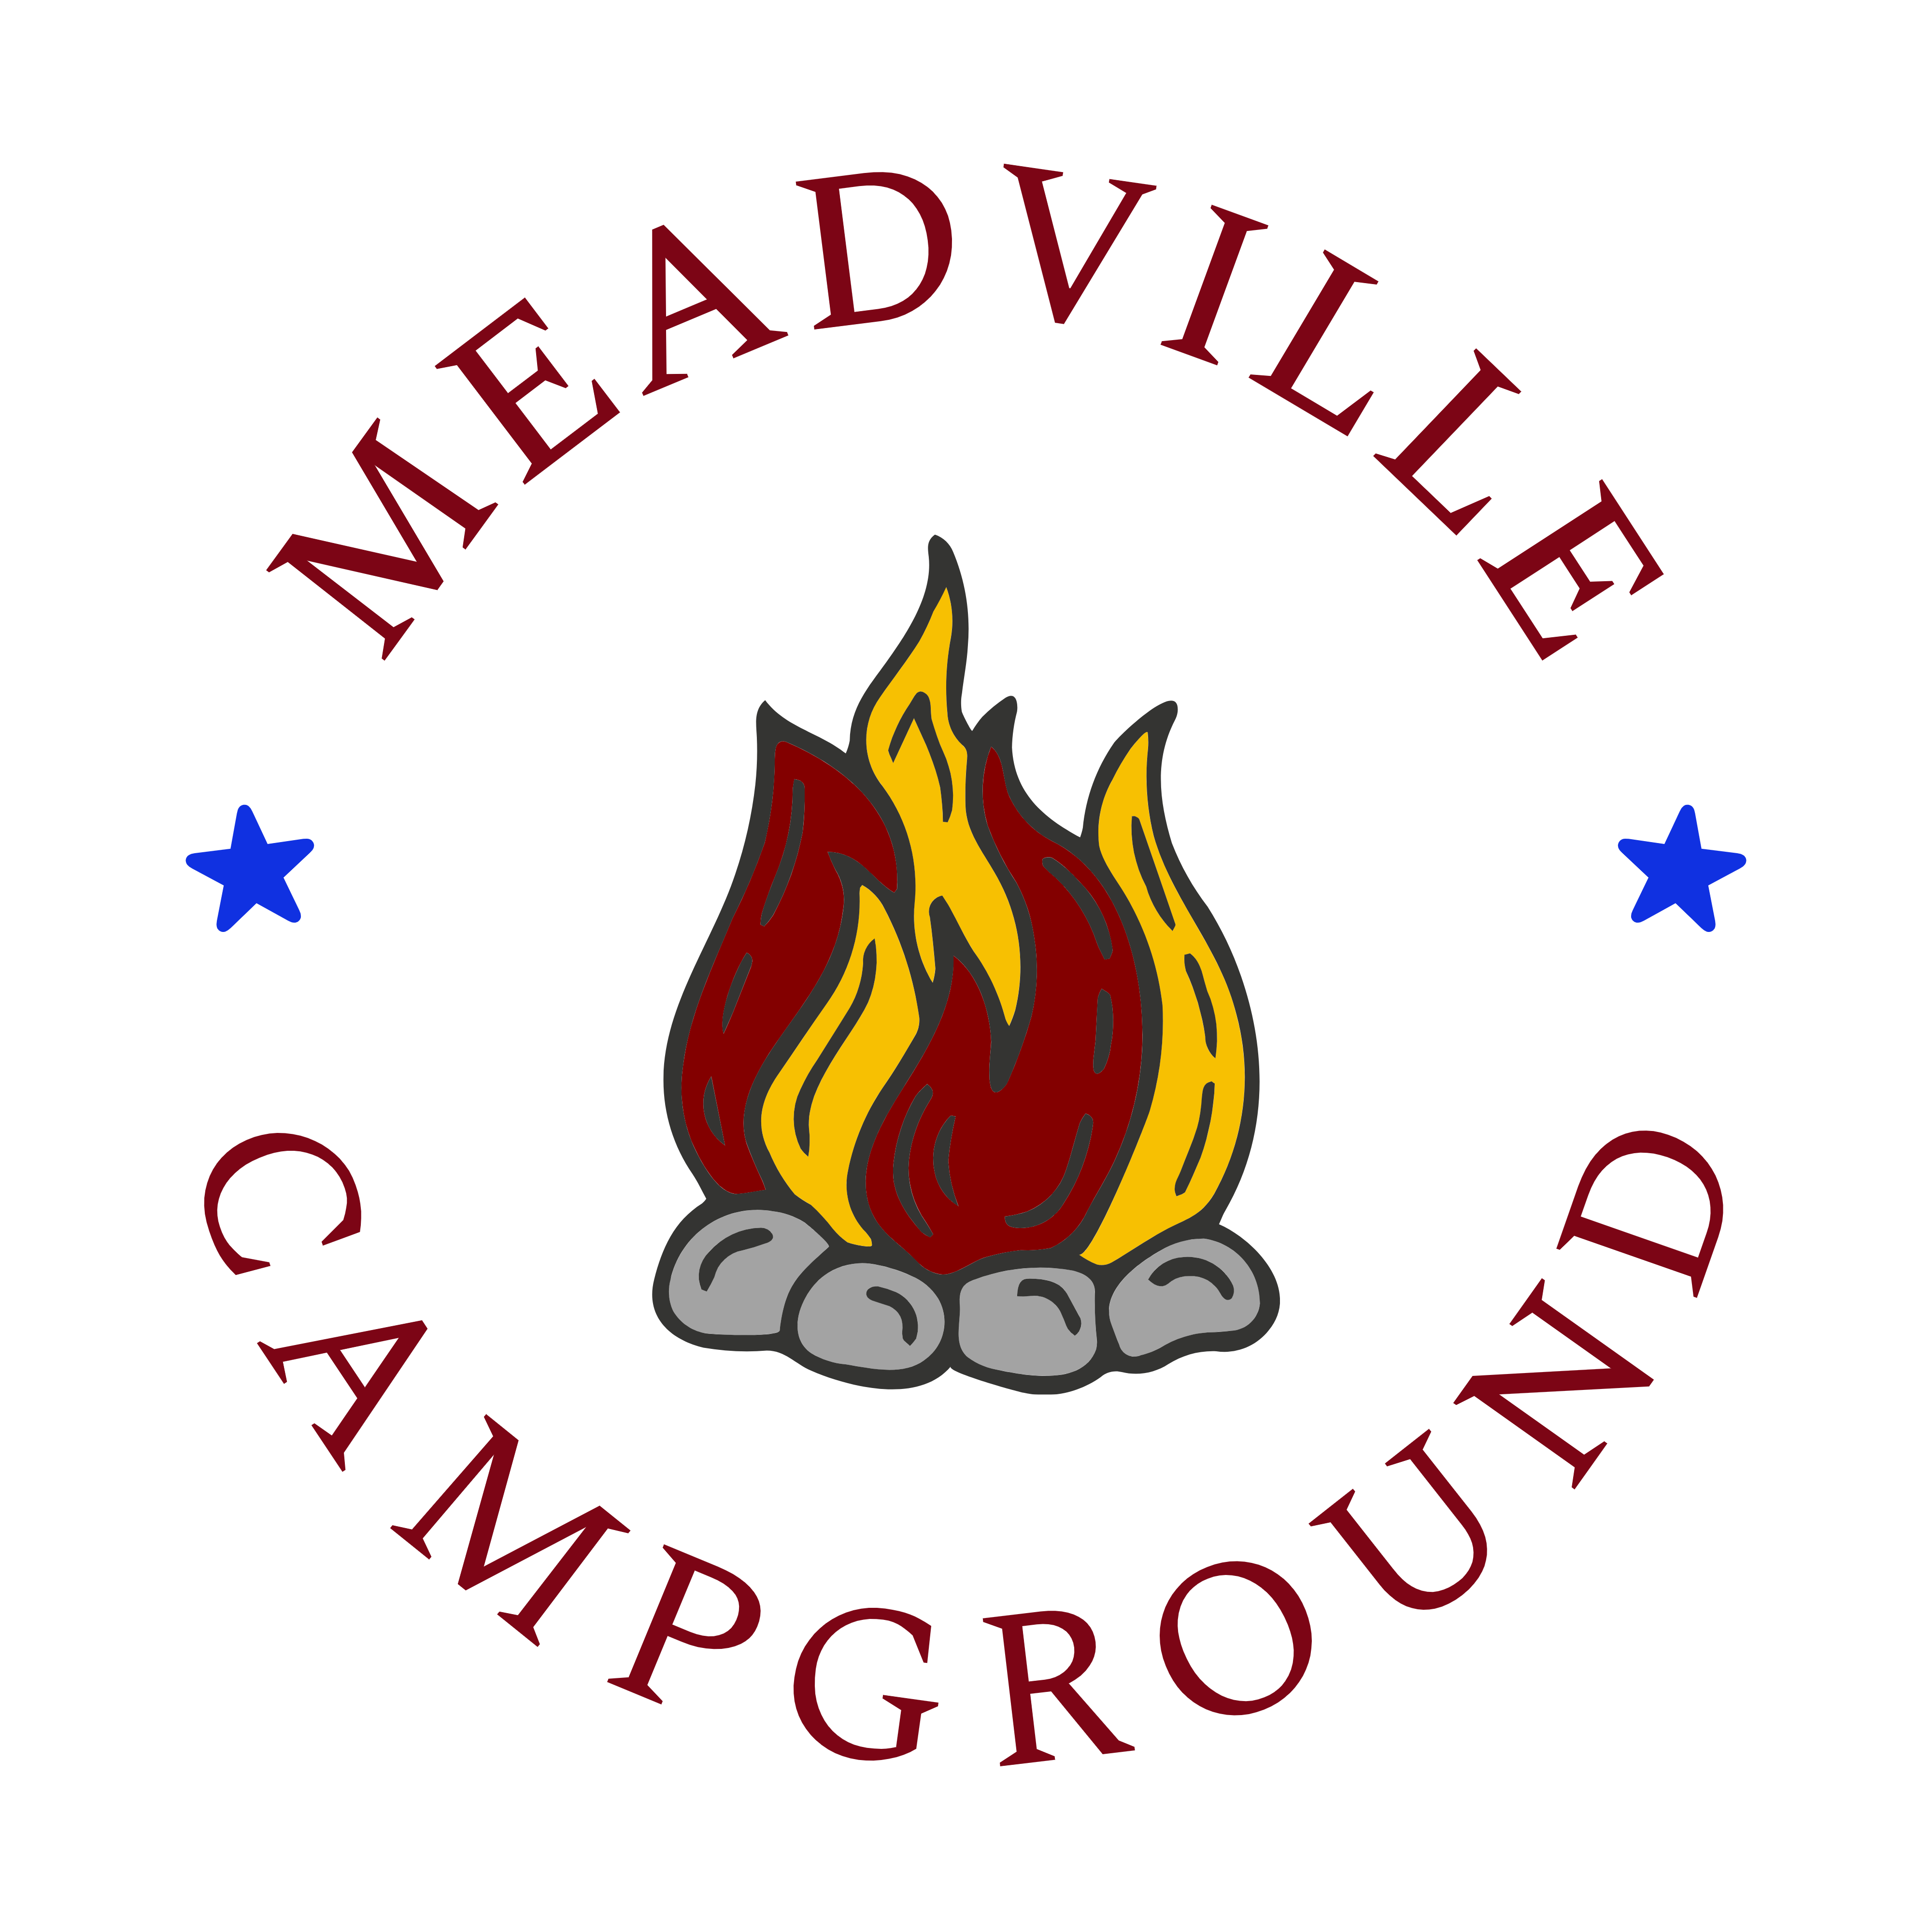 Meadville Campground